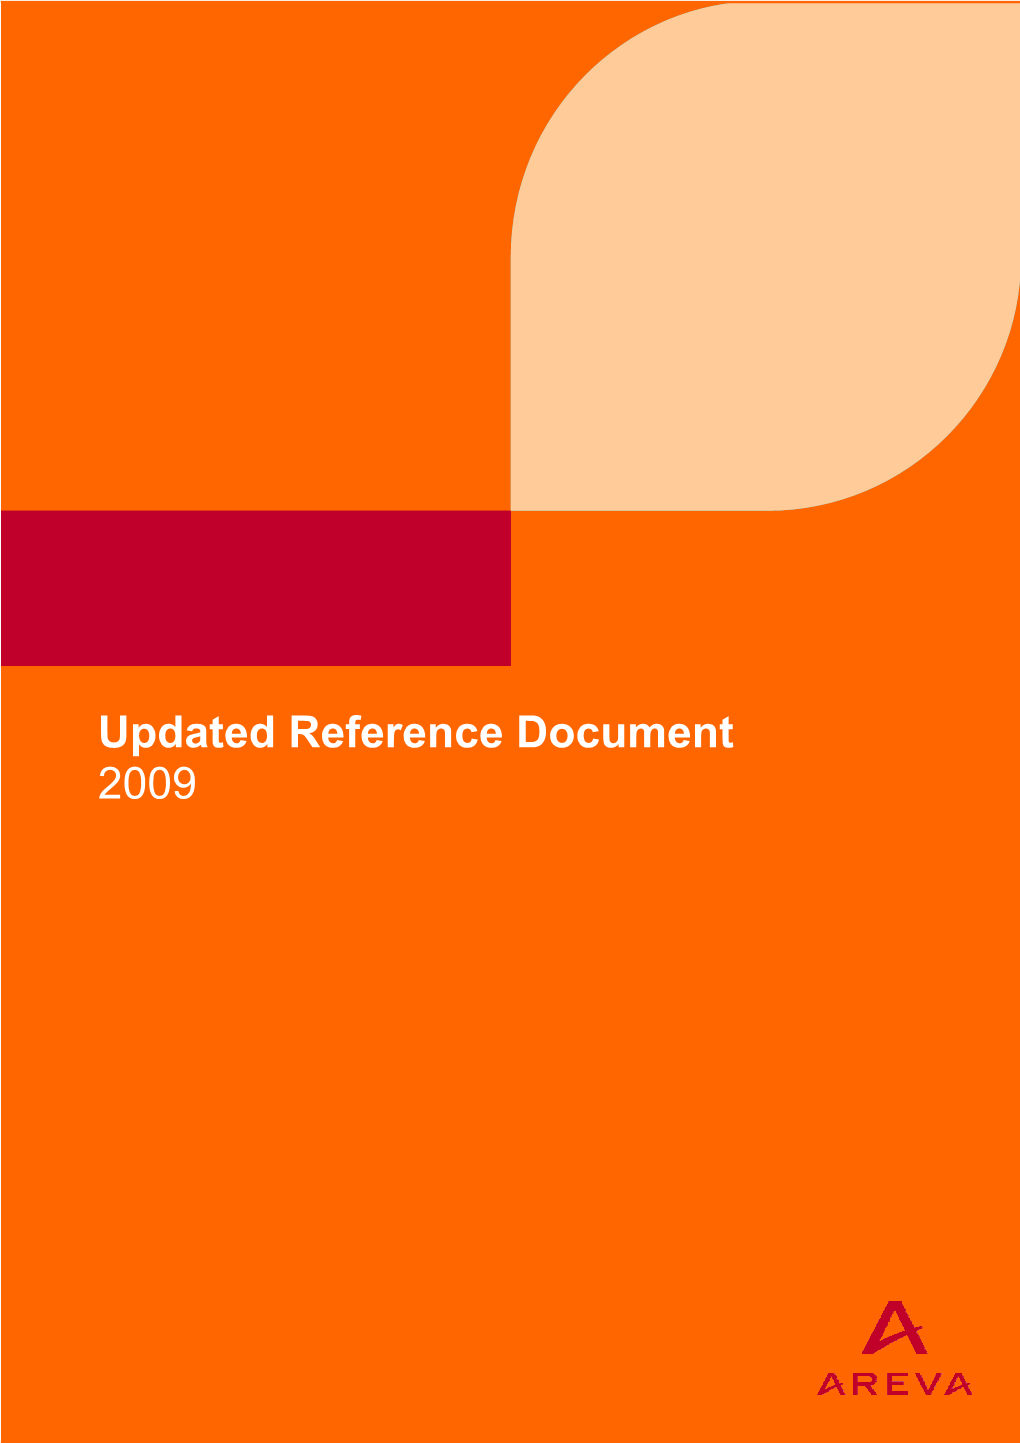 Updated Reference Document 2009